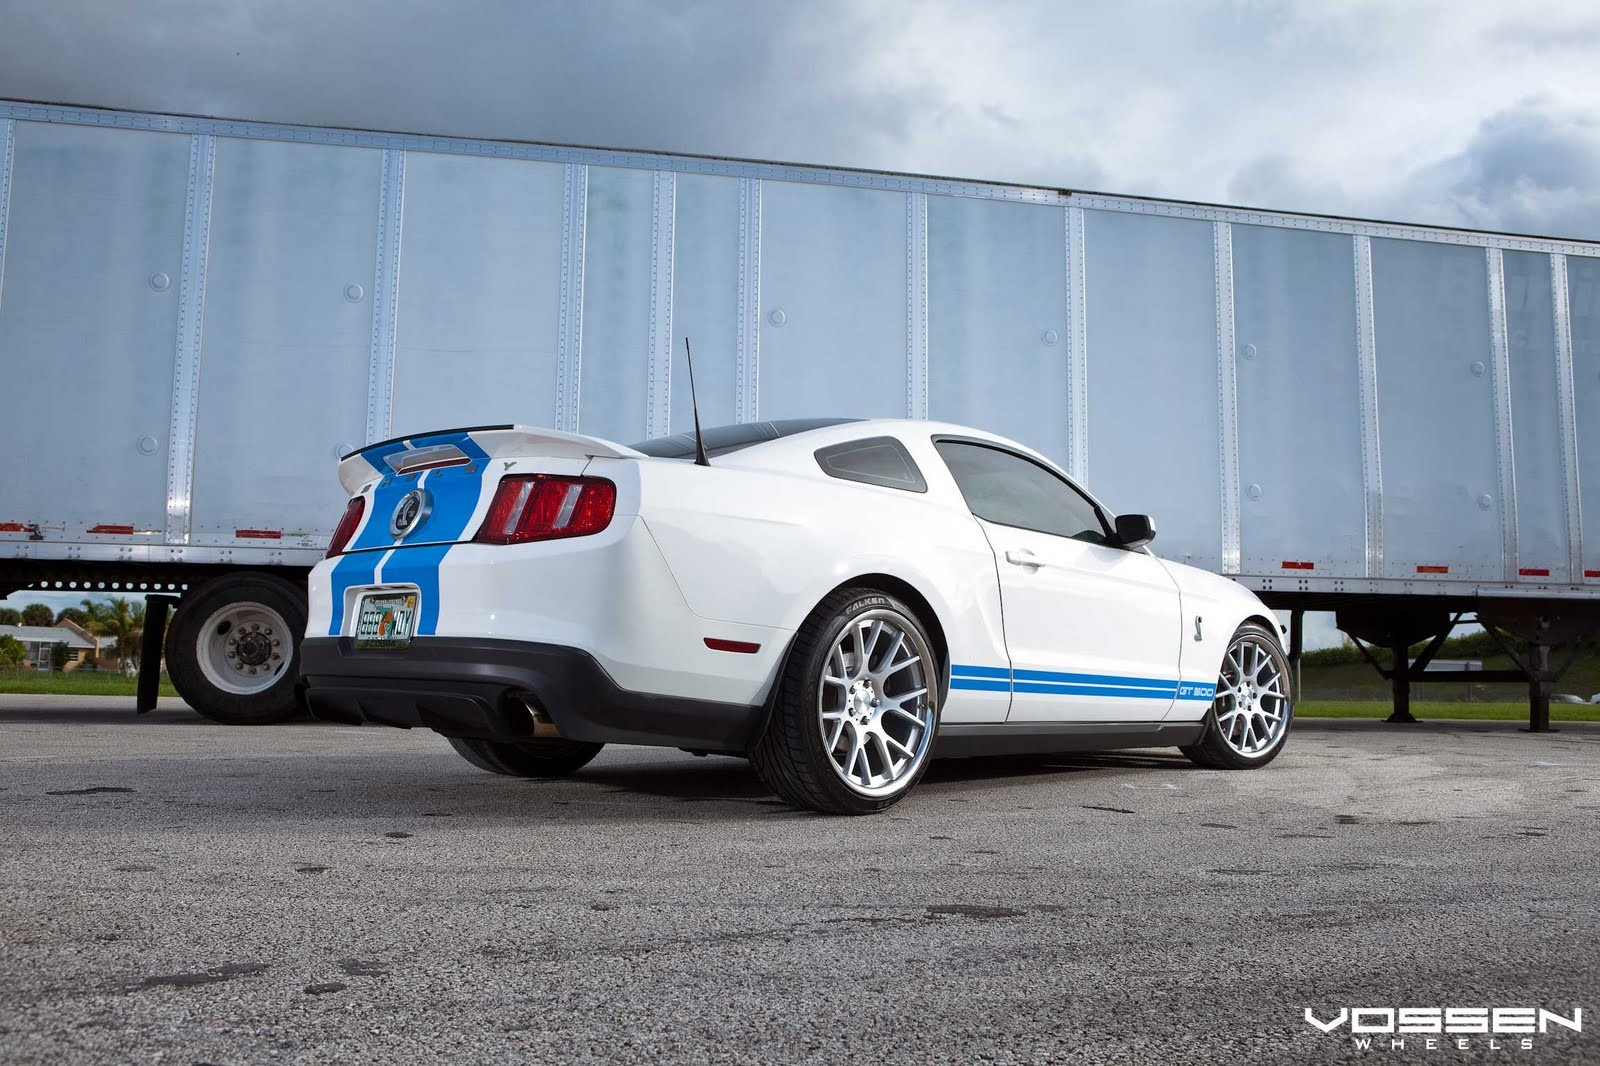 General 1600x1066 car white cars vehicle Ford Mustang Ford Ford Mustang S-197 II muscle cars American cars Vossen